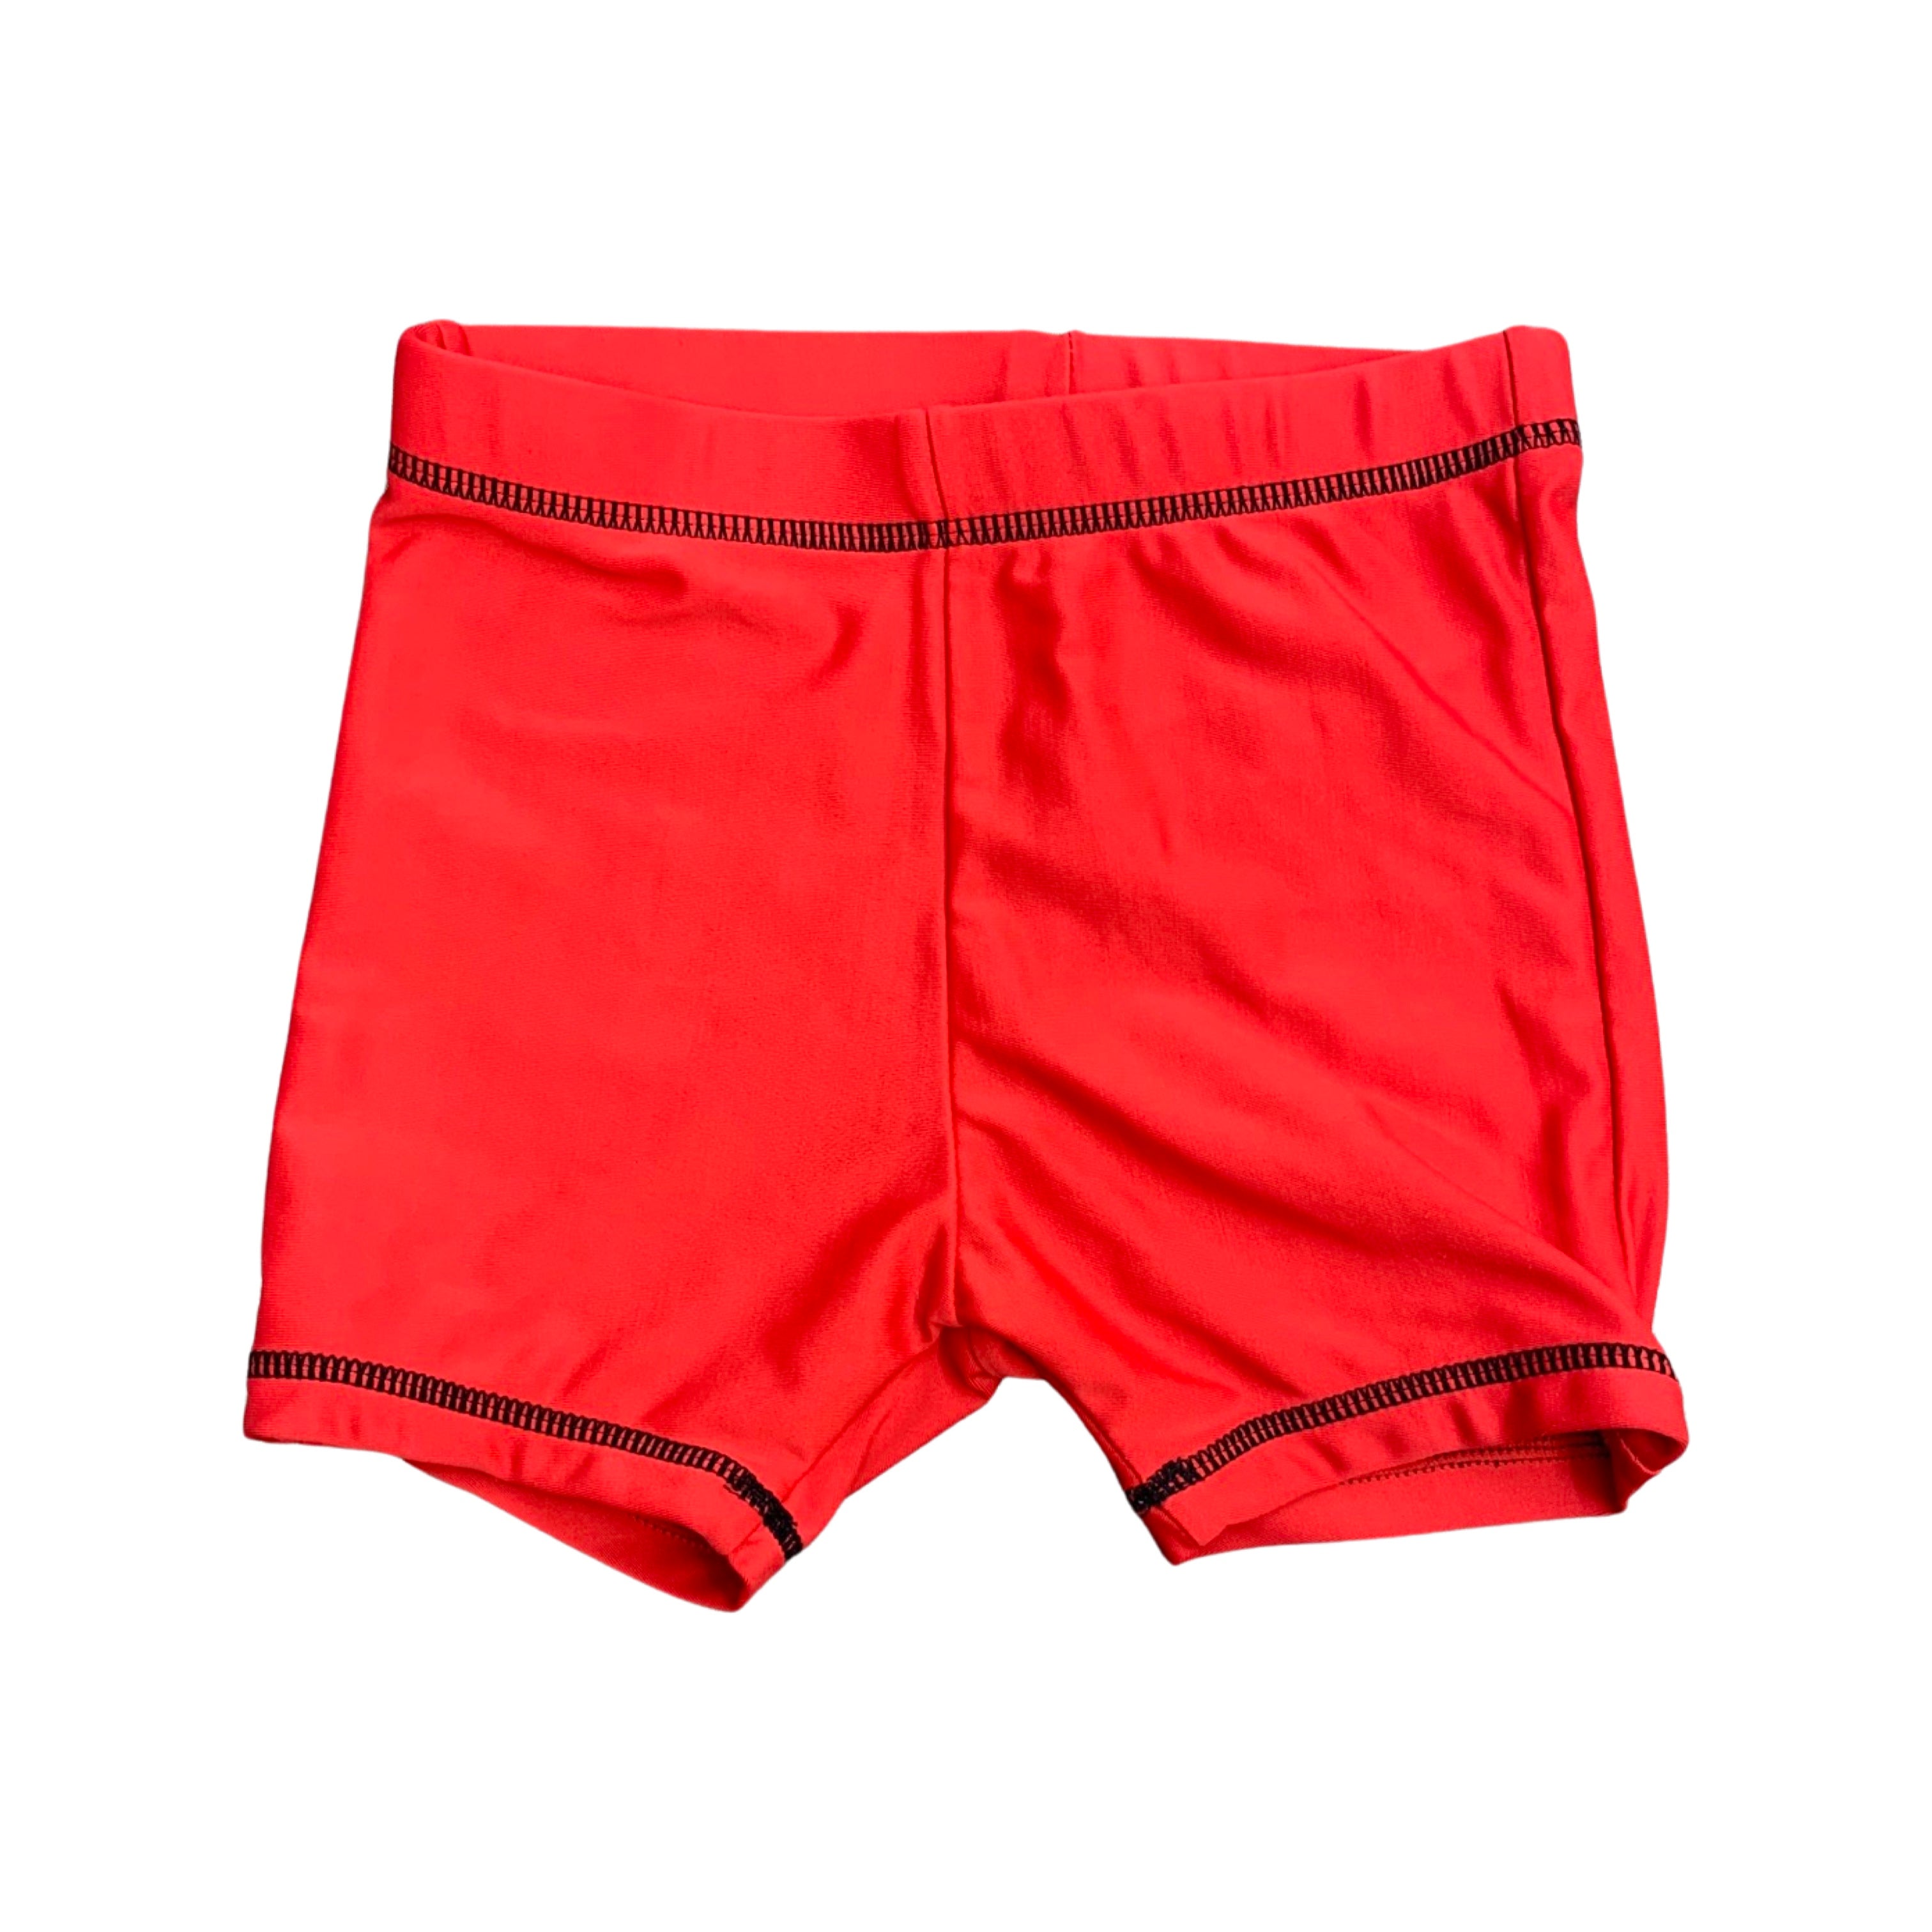 George Swimming Trunks Baby Boy 9-12 Months/11kg